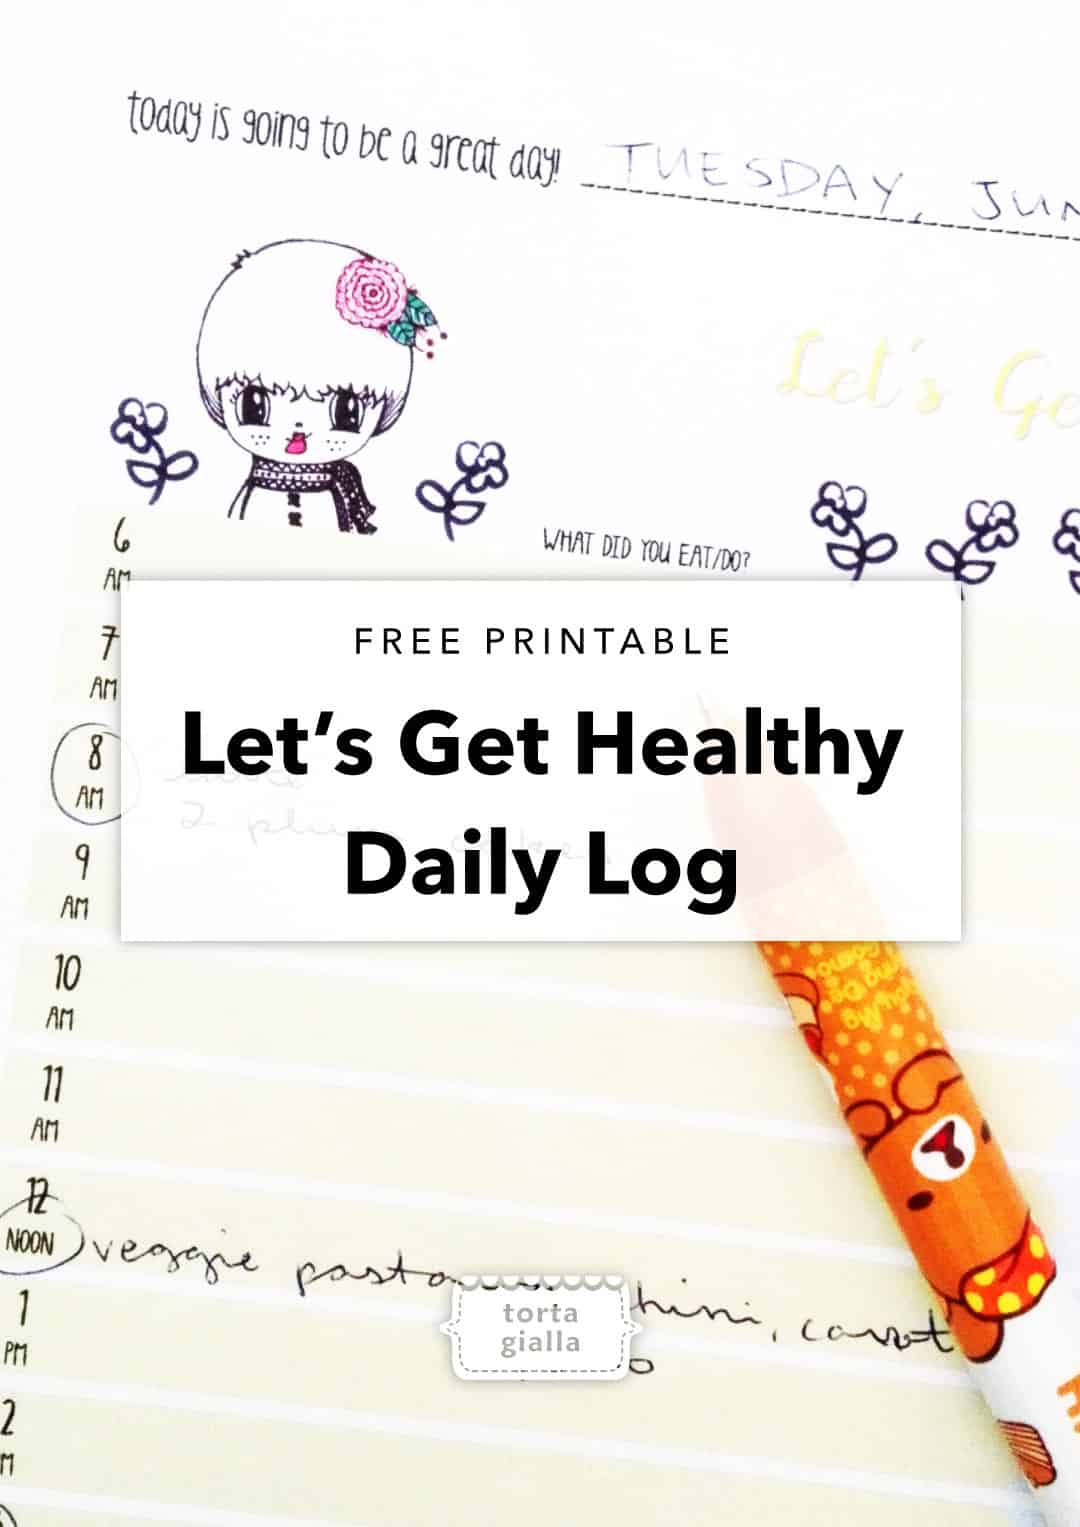 Let's Get Healthy Daily Log Printable